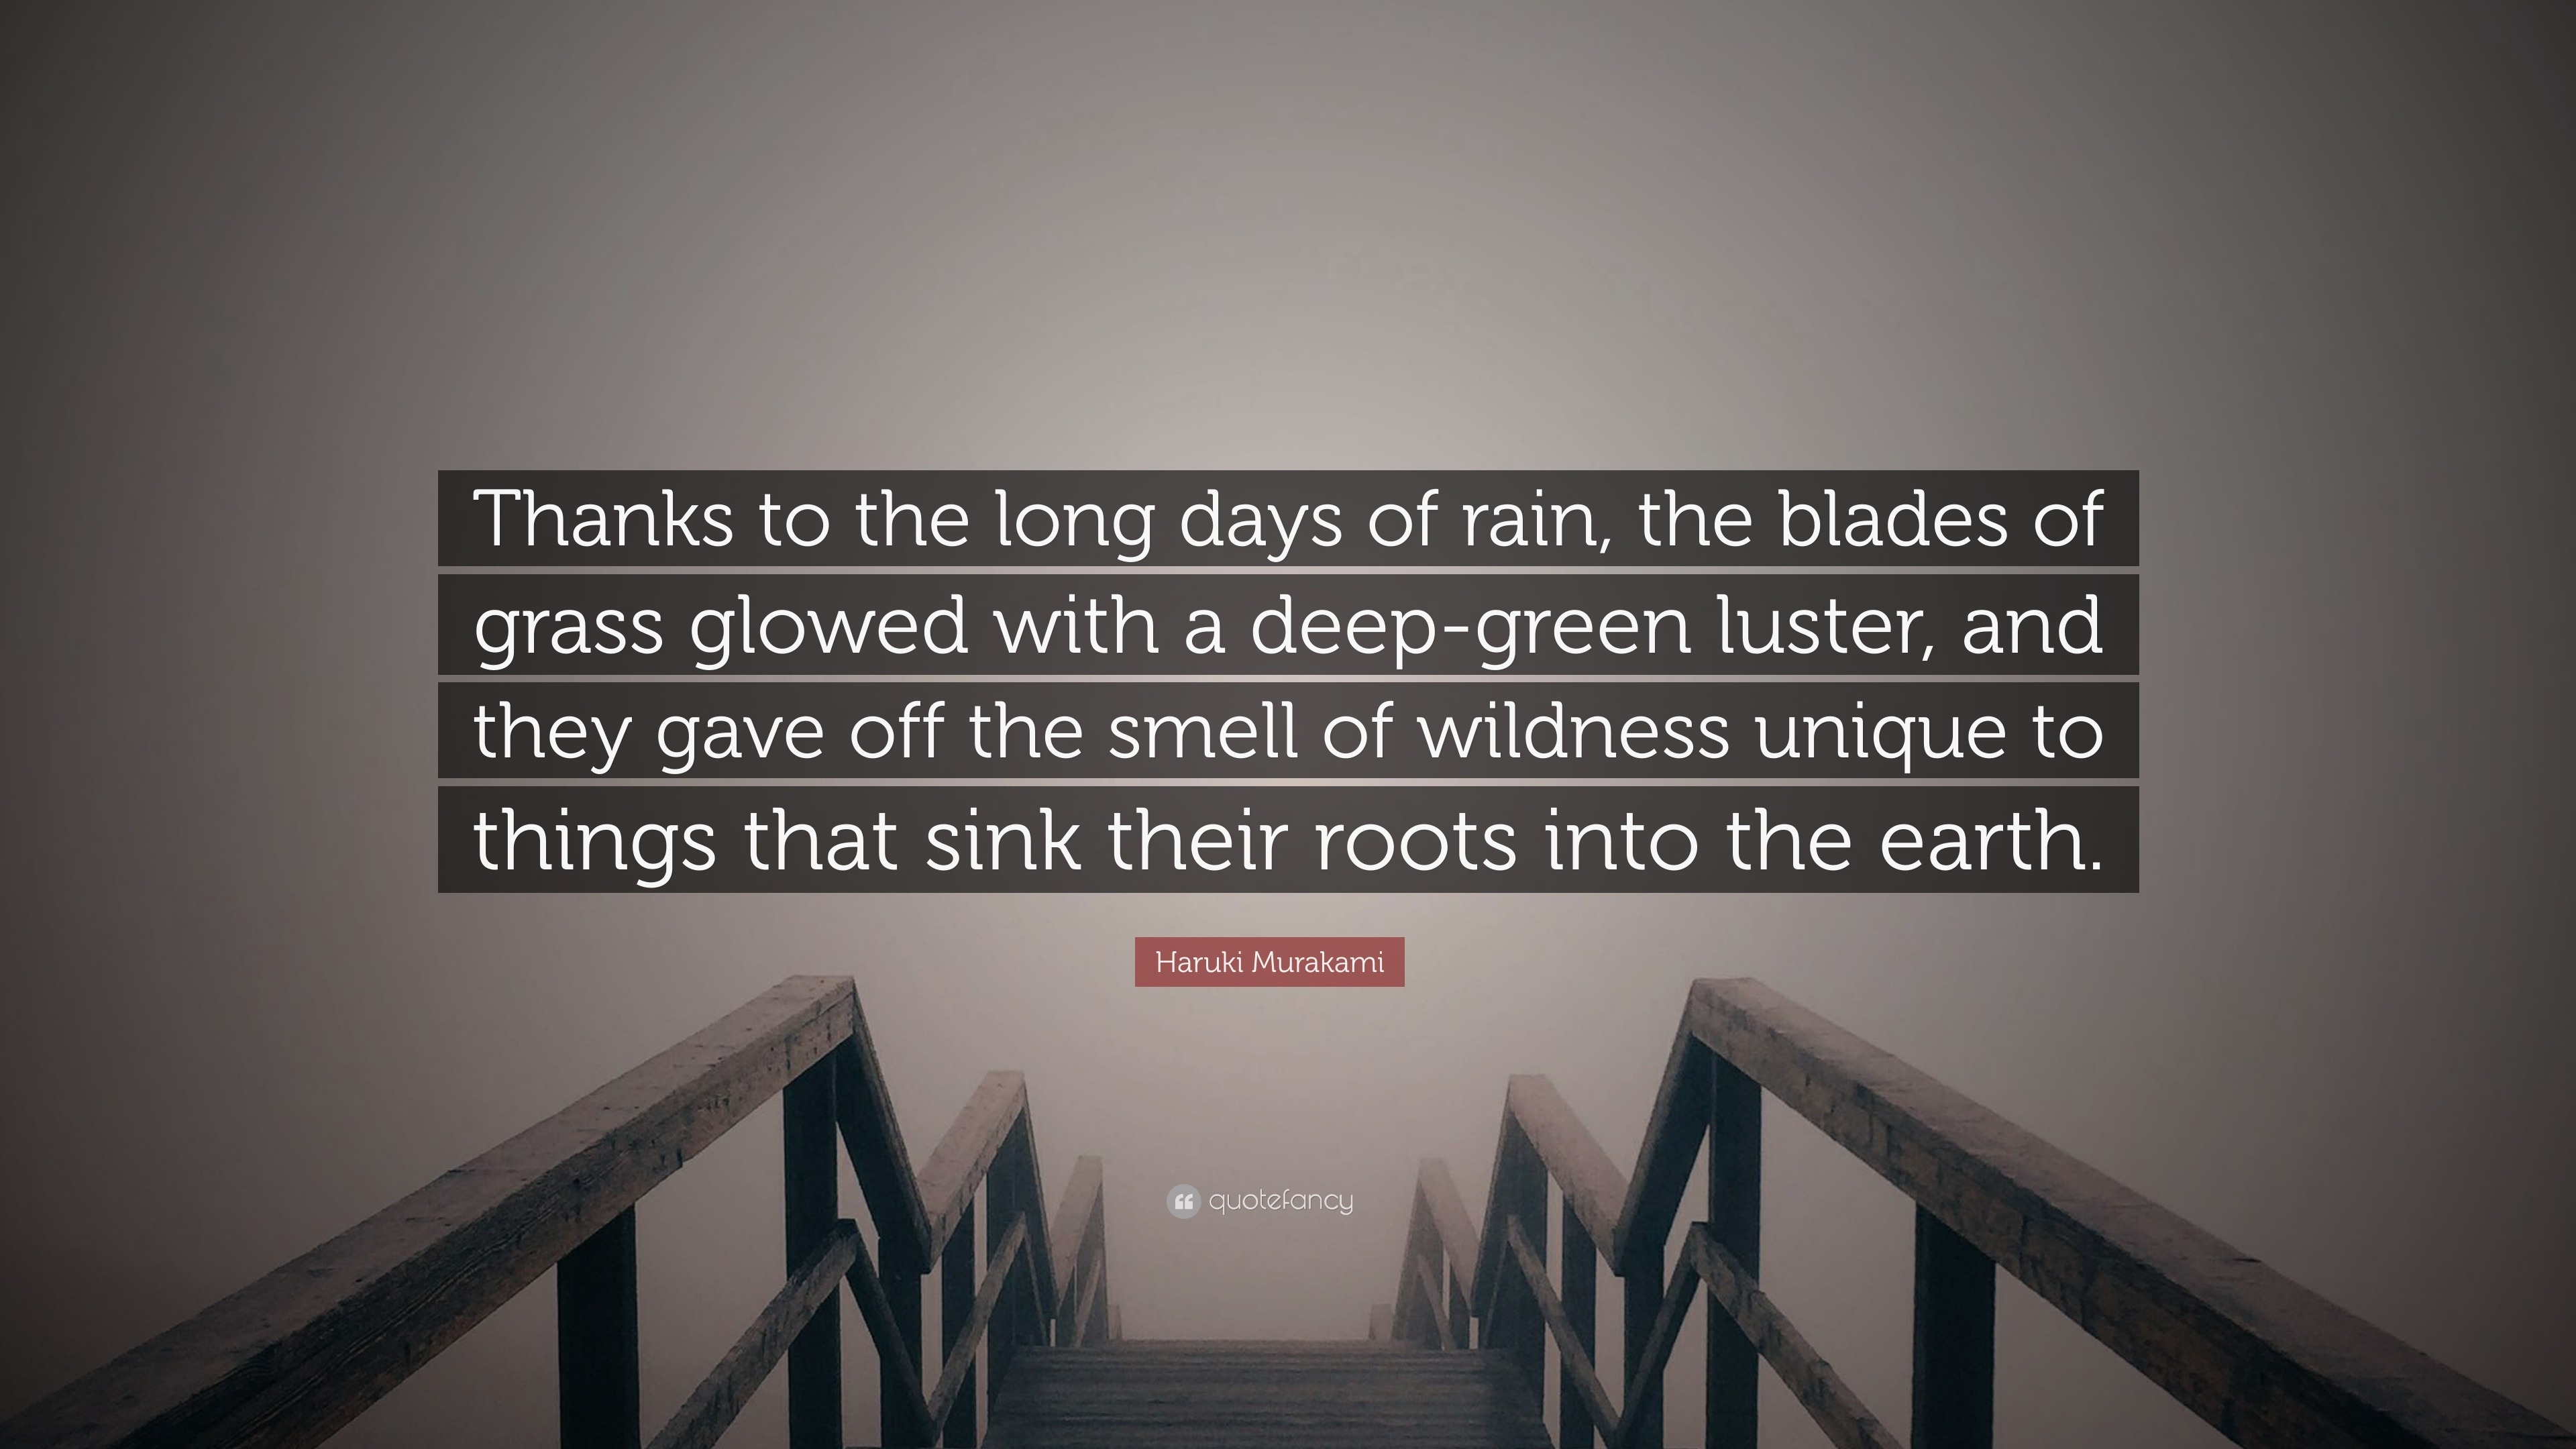 Haruki Murakami Quote: “Thanks to the long days of rain, the blades of  grass glowed with a deep-green luster, and they gave off the smell of  wil”